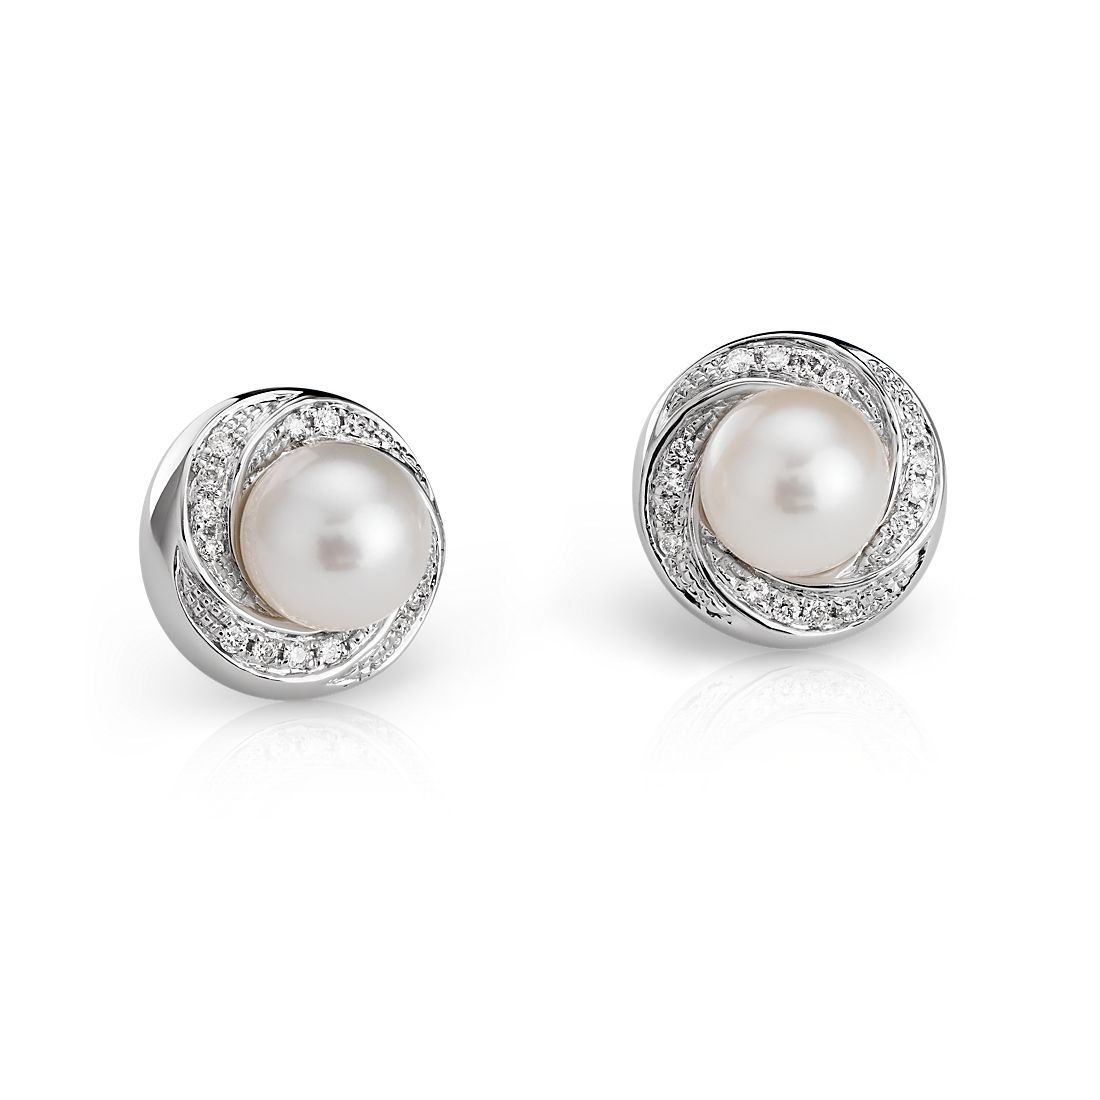 Freshwater Cultured Pearl and Diamond Stud Earrings in 14k White Gold  (7.5mm)